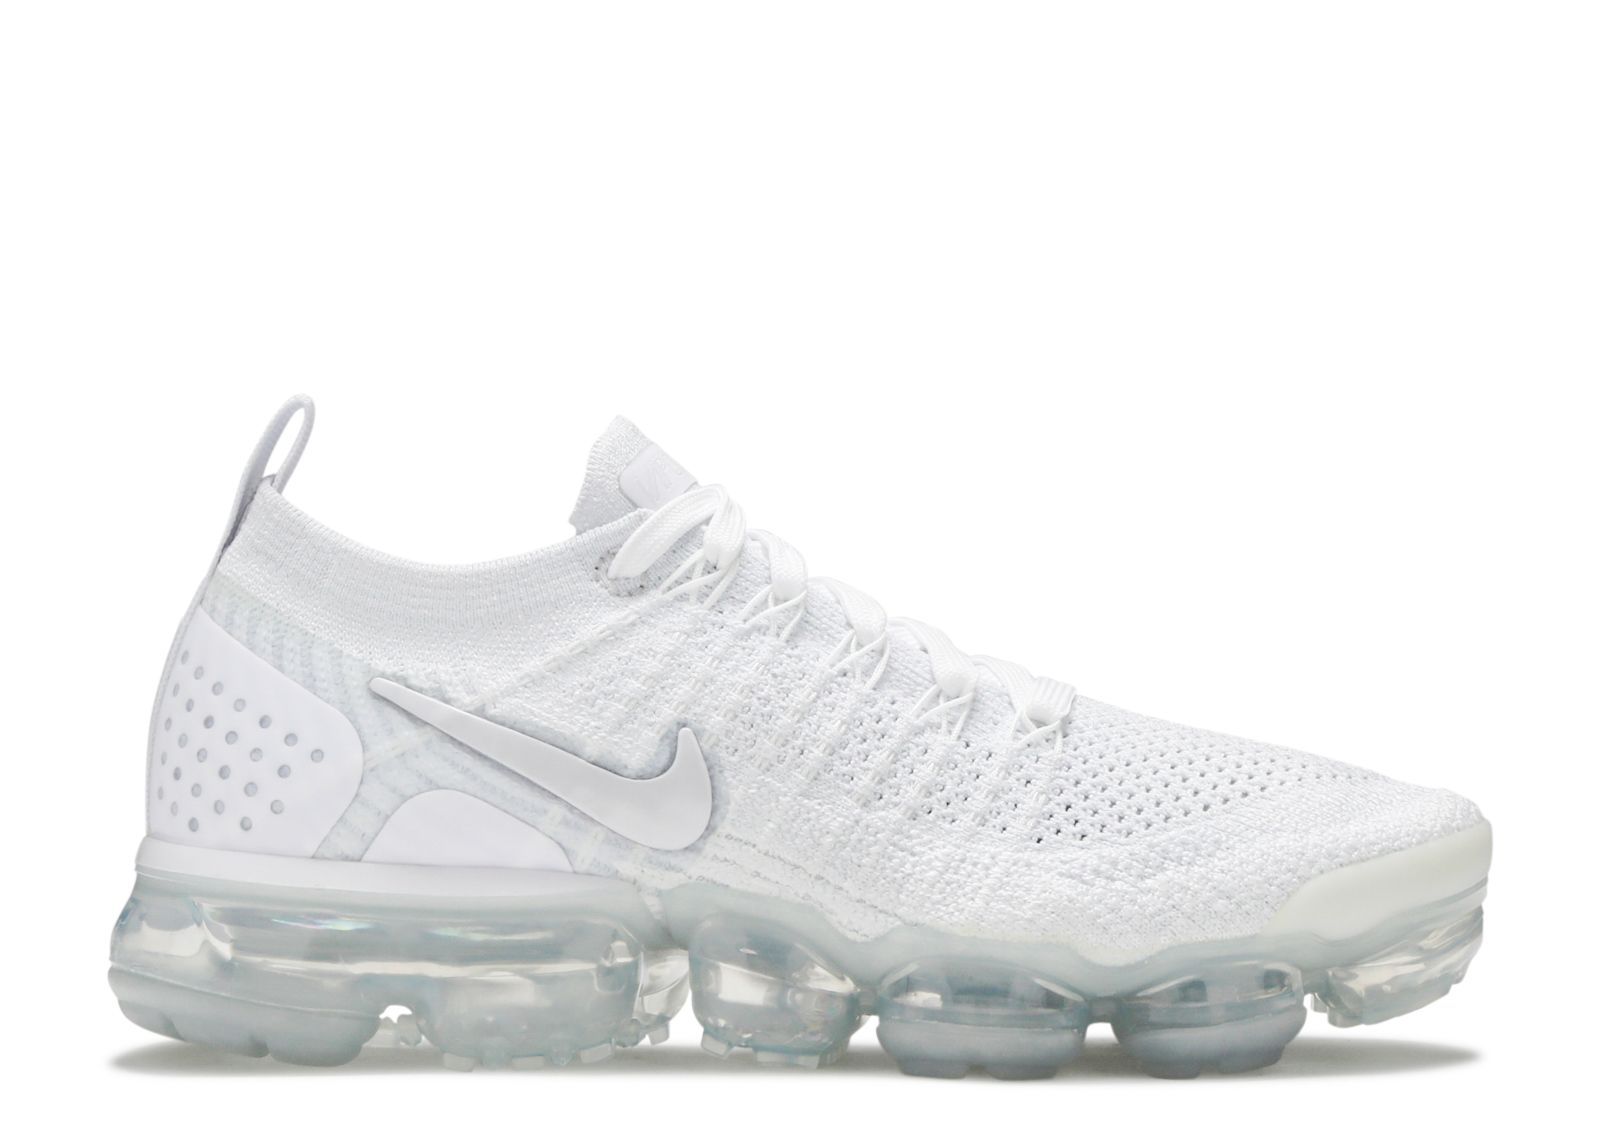 white and grey vapormax